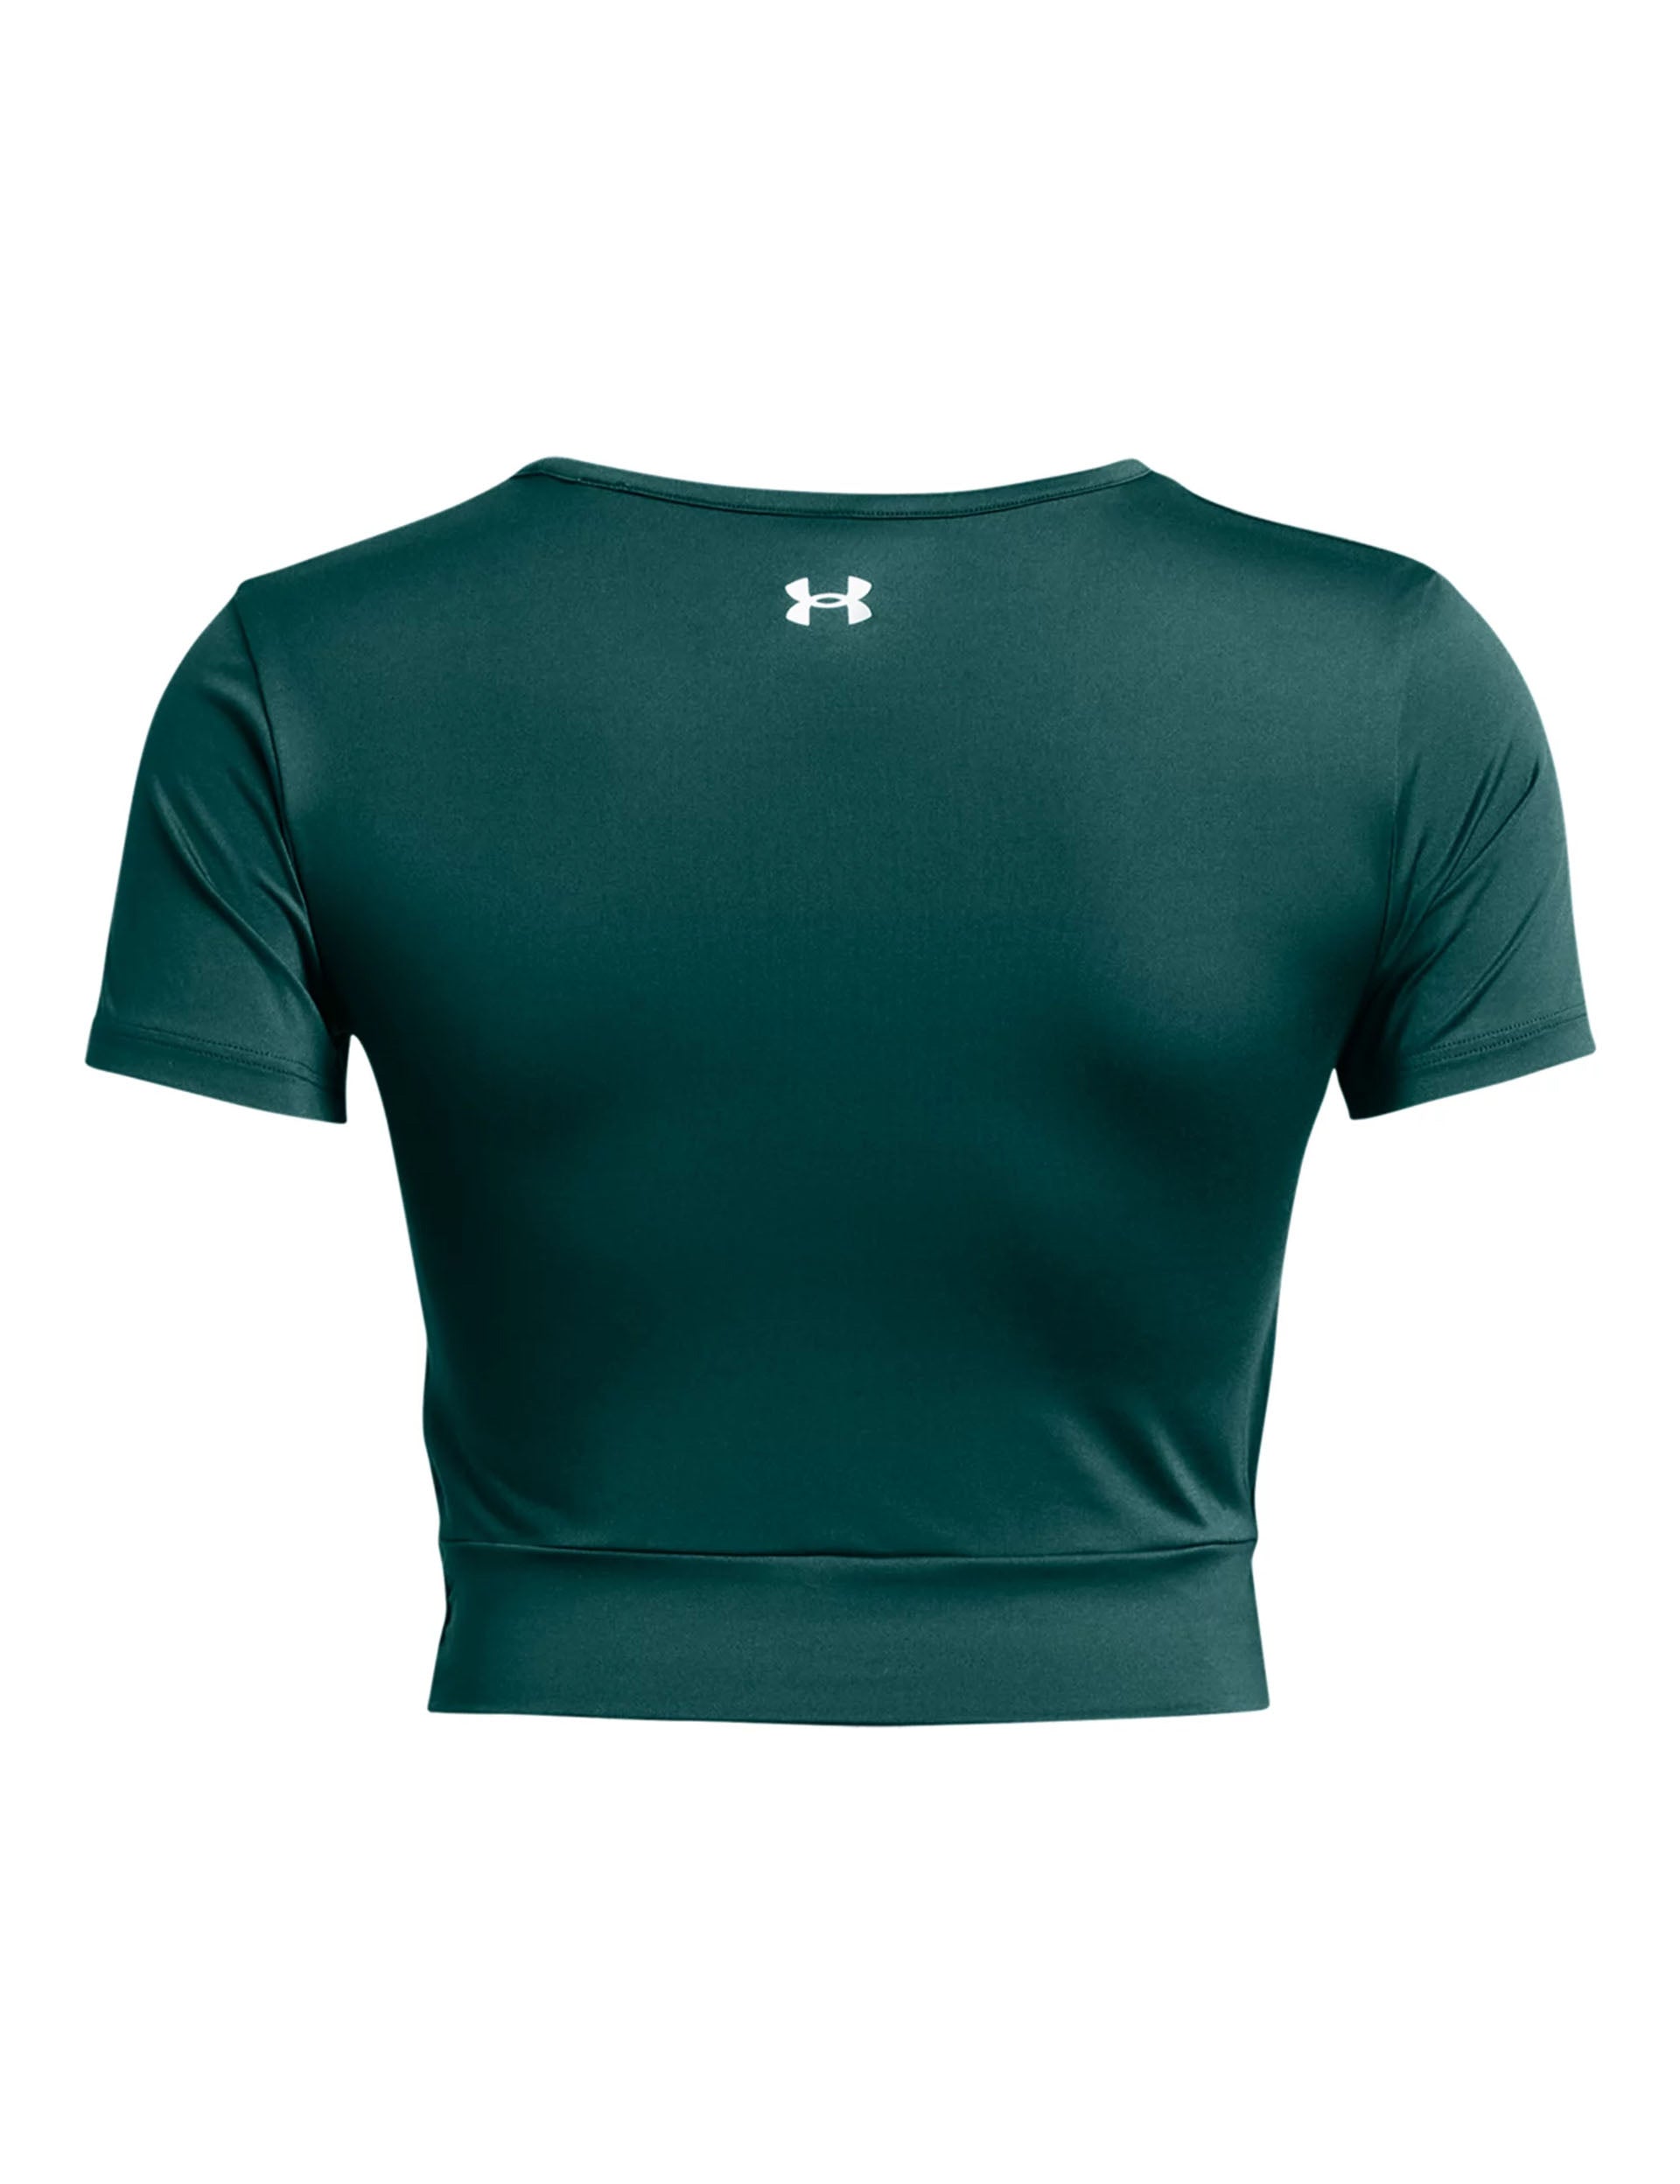 Under Armour, Motion Crossover Crop Tee - Teal